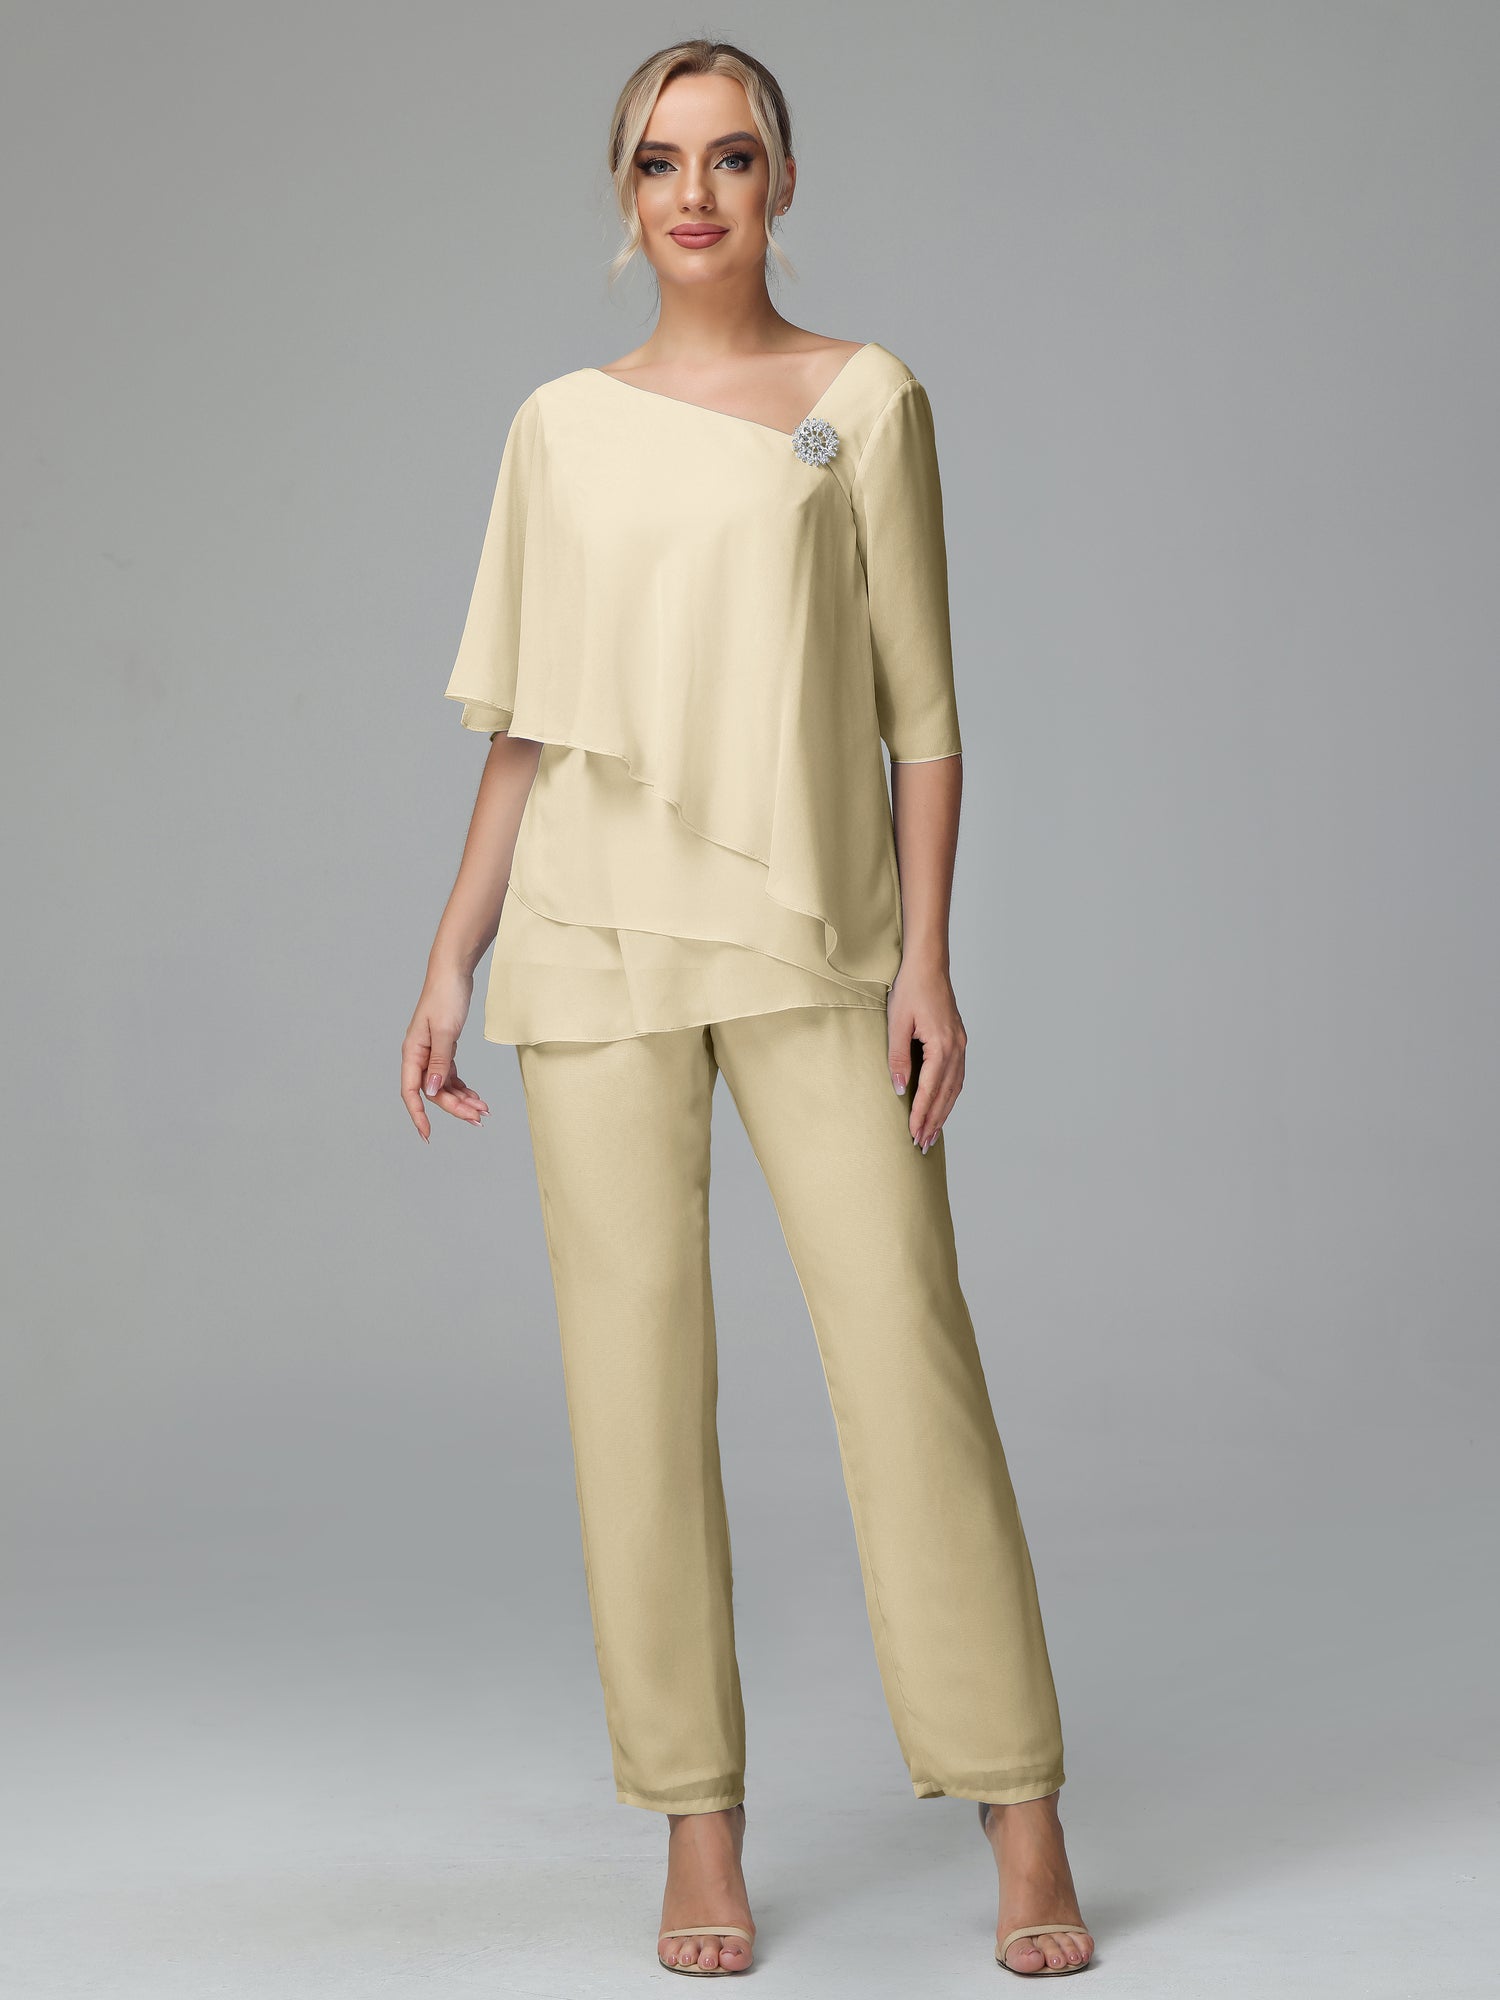 Half Sleeves Chiffon Mother Of The Bride Dress Pant Suits